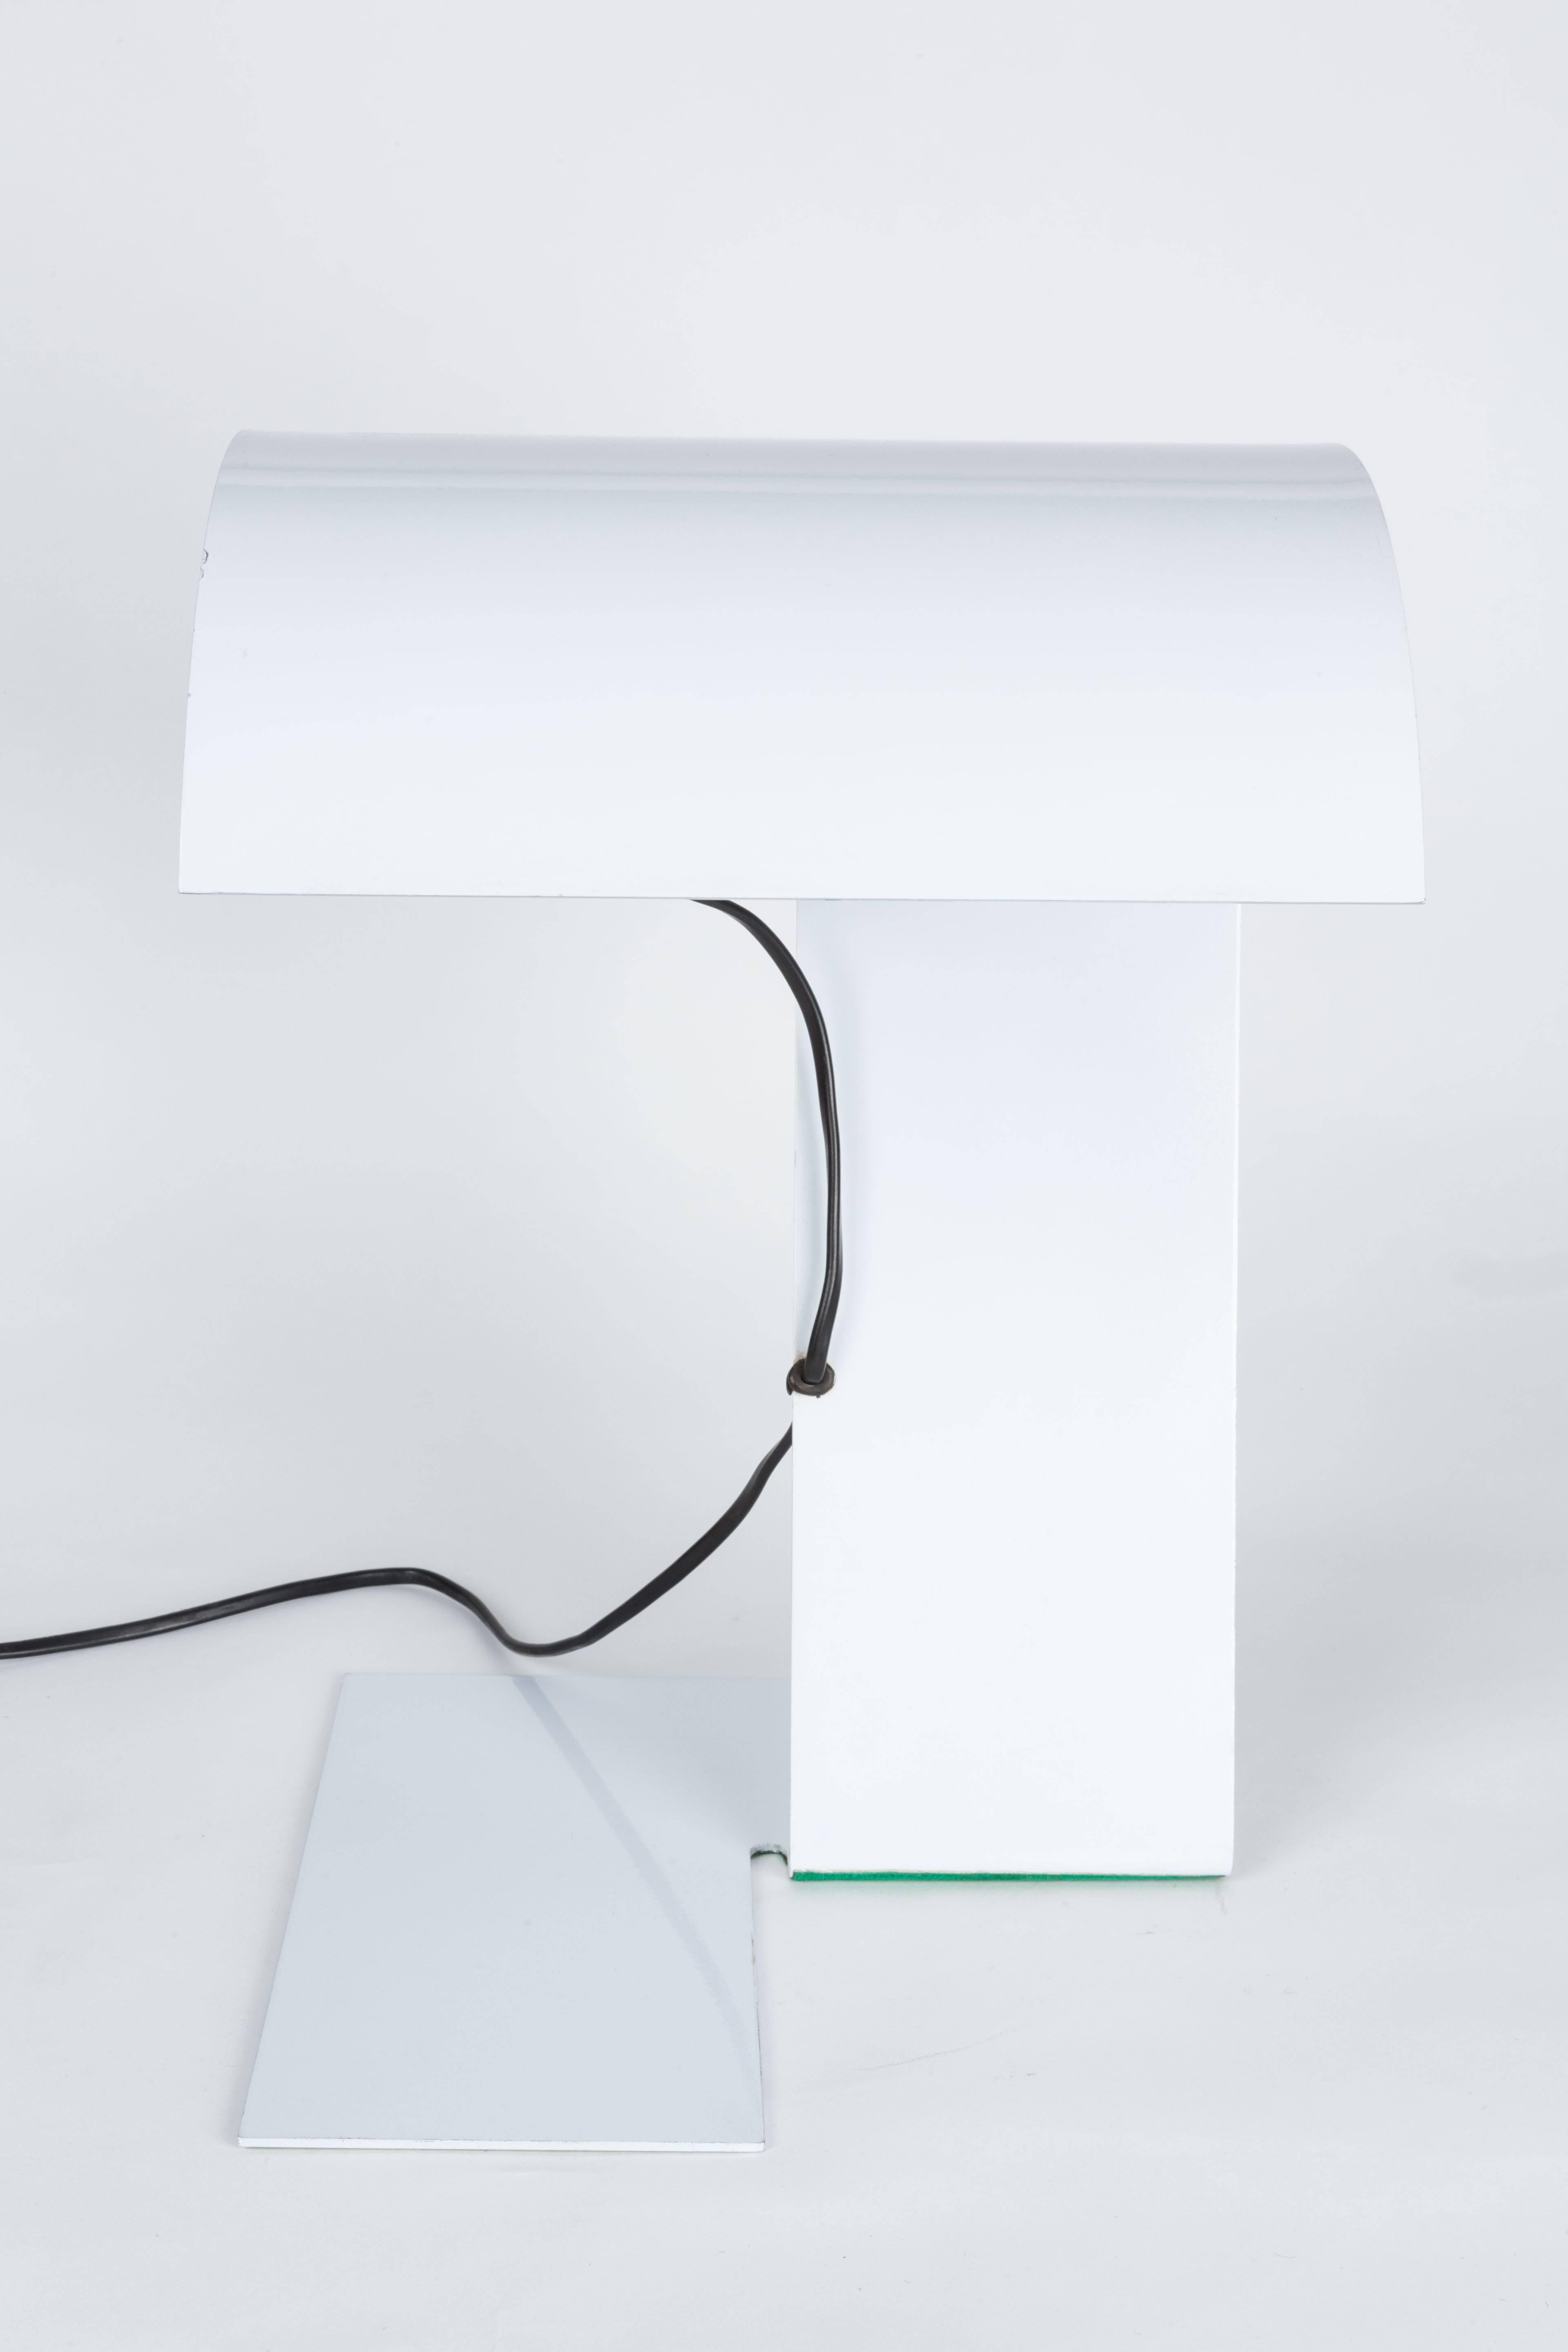 Stilnovo white 'Blitz' table lamp, circa 1972. Executed in white lacquered steel, this ultra refined sculptural lamp was designed by the legendary team of Trabucchi & Vecchi & Volpi for Stilnovo, Italy. Retains original manufacturer's stamp in metal